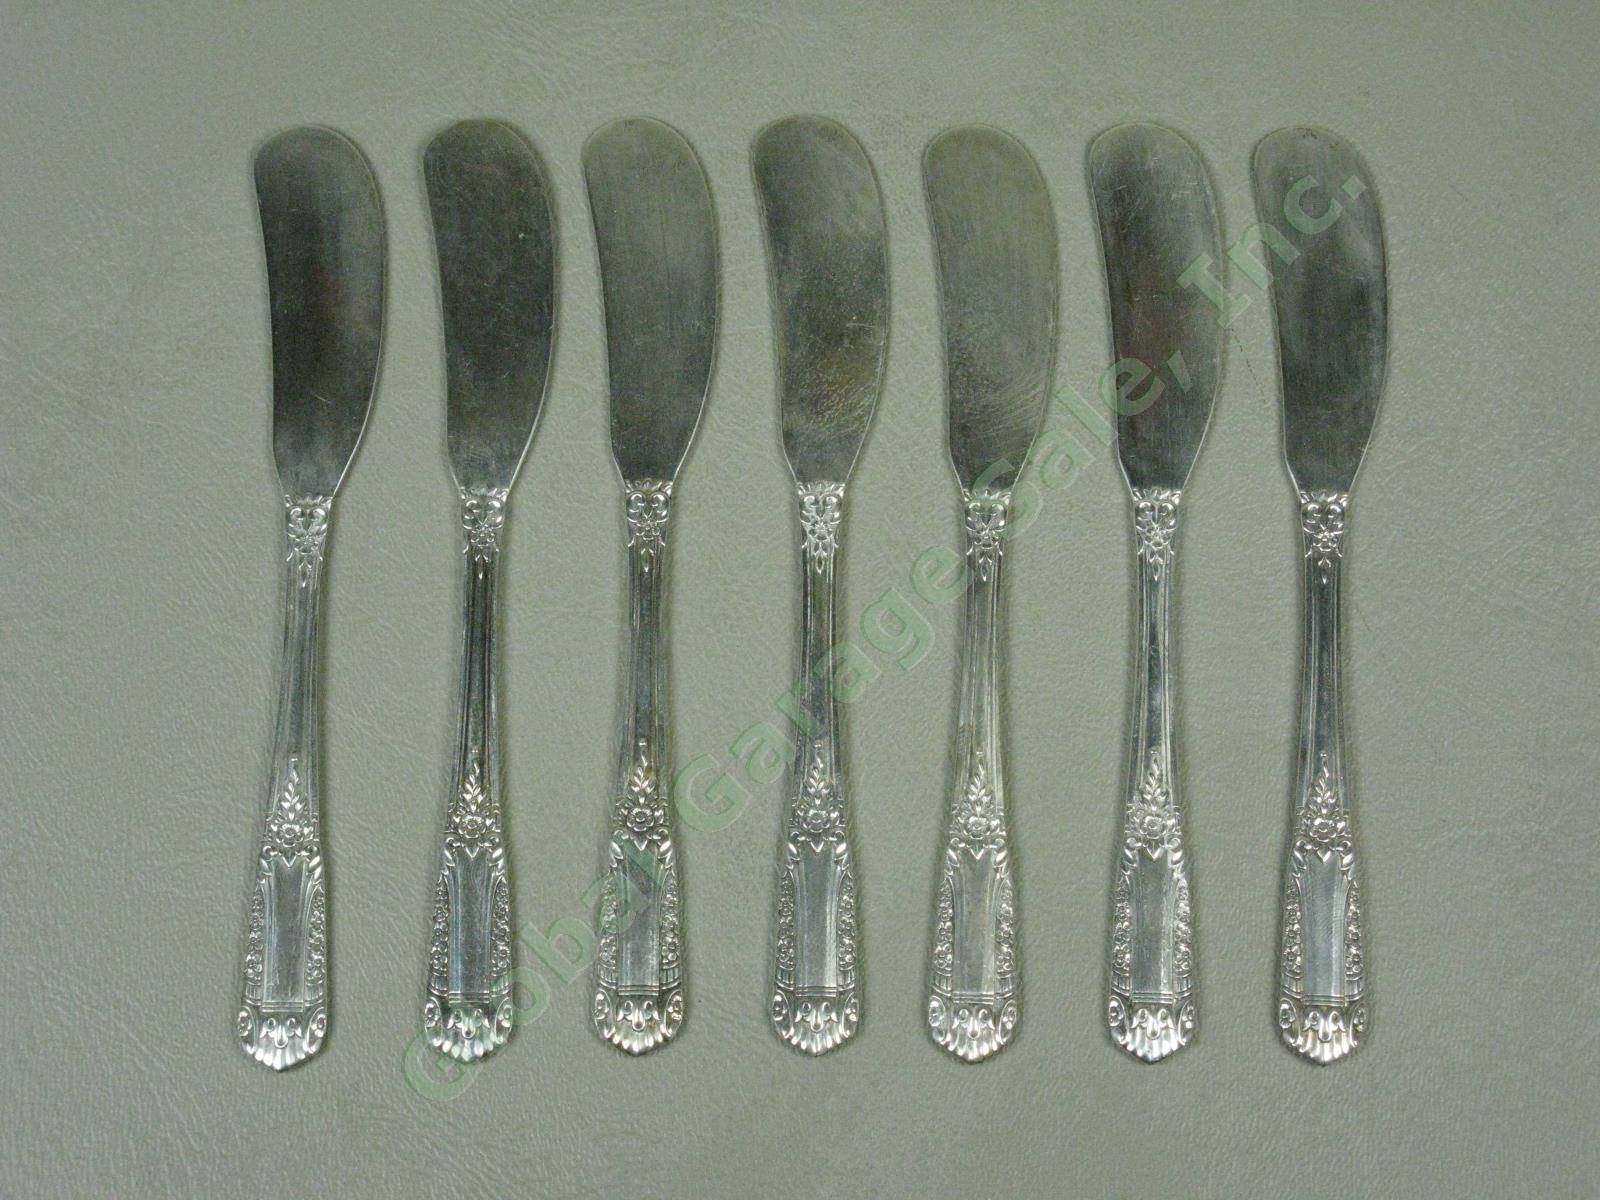 7 State House Inaugural Sterling Silver Butter Knives Silverware Flatware Set NR